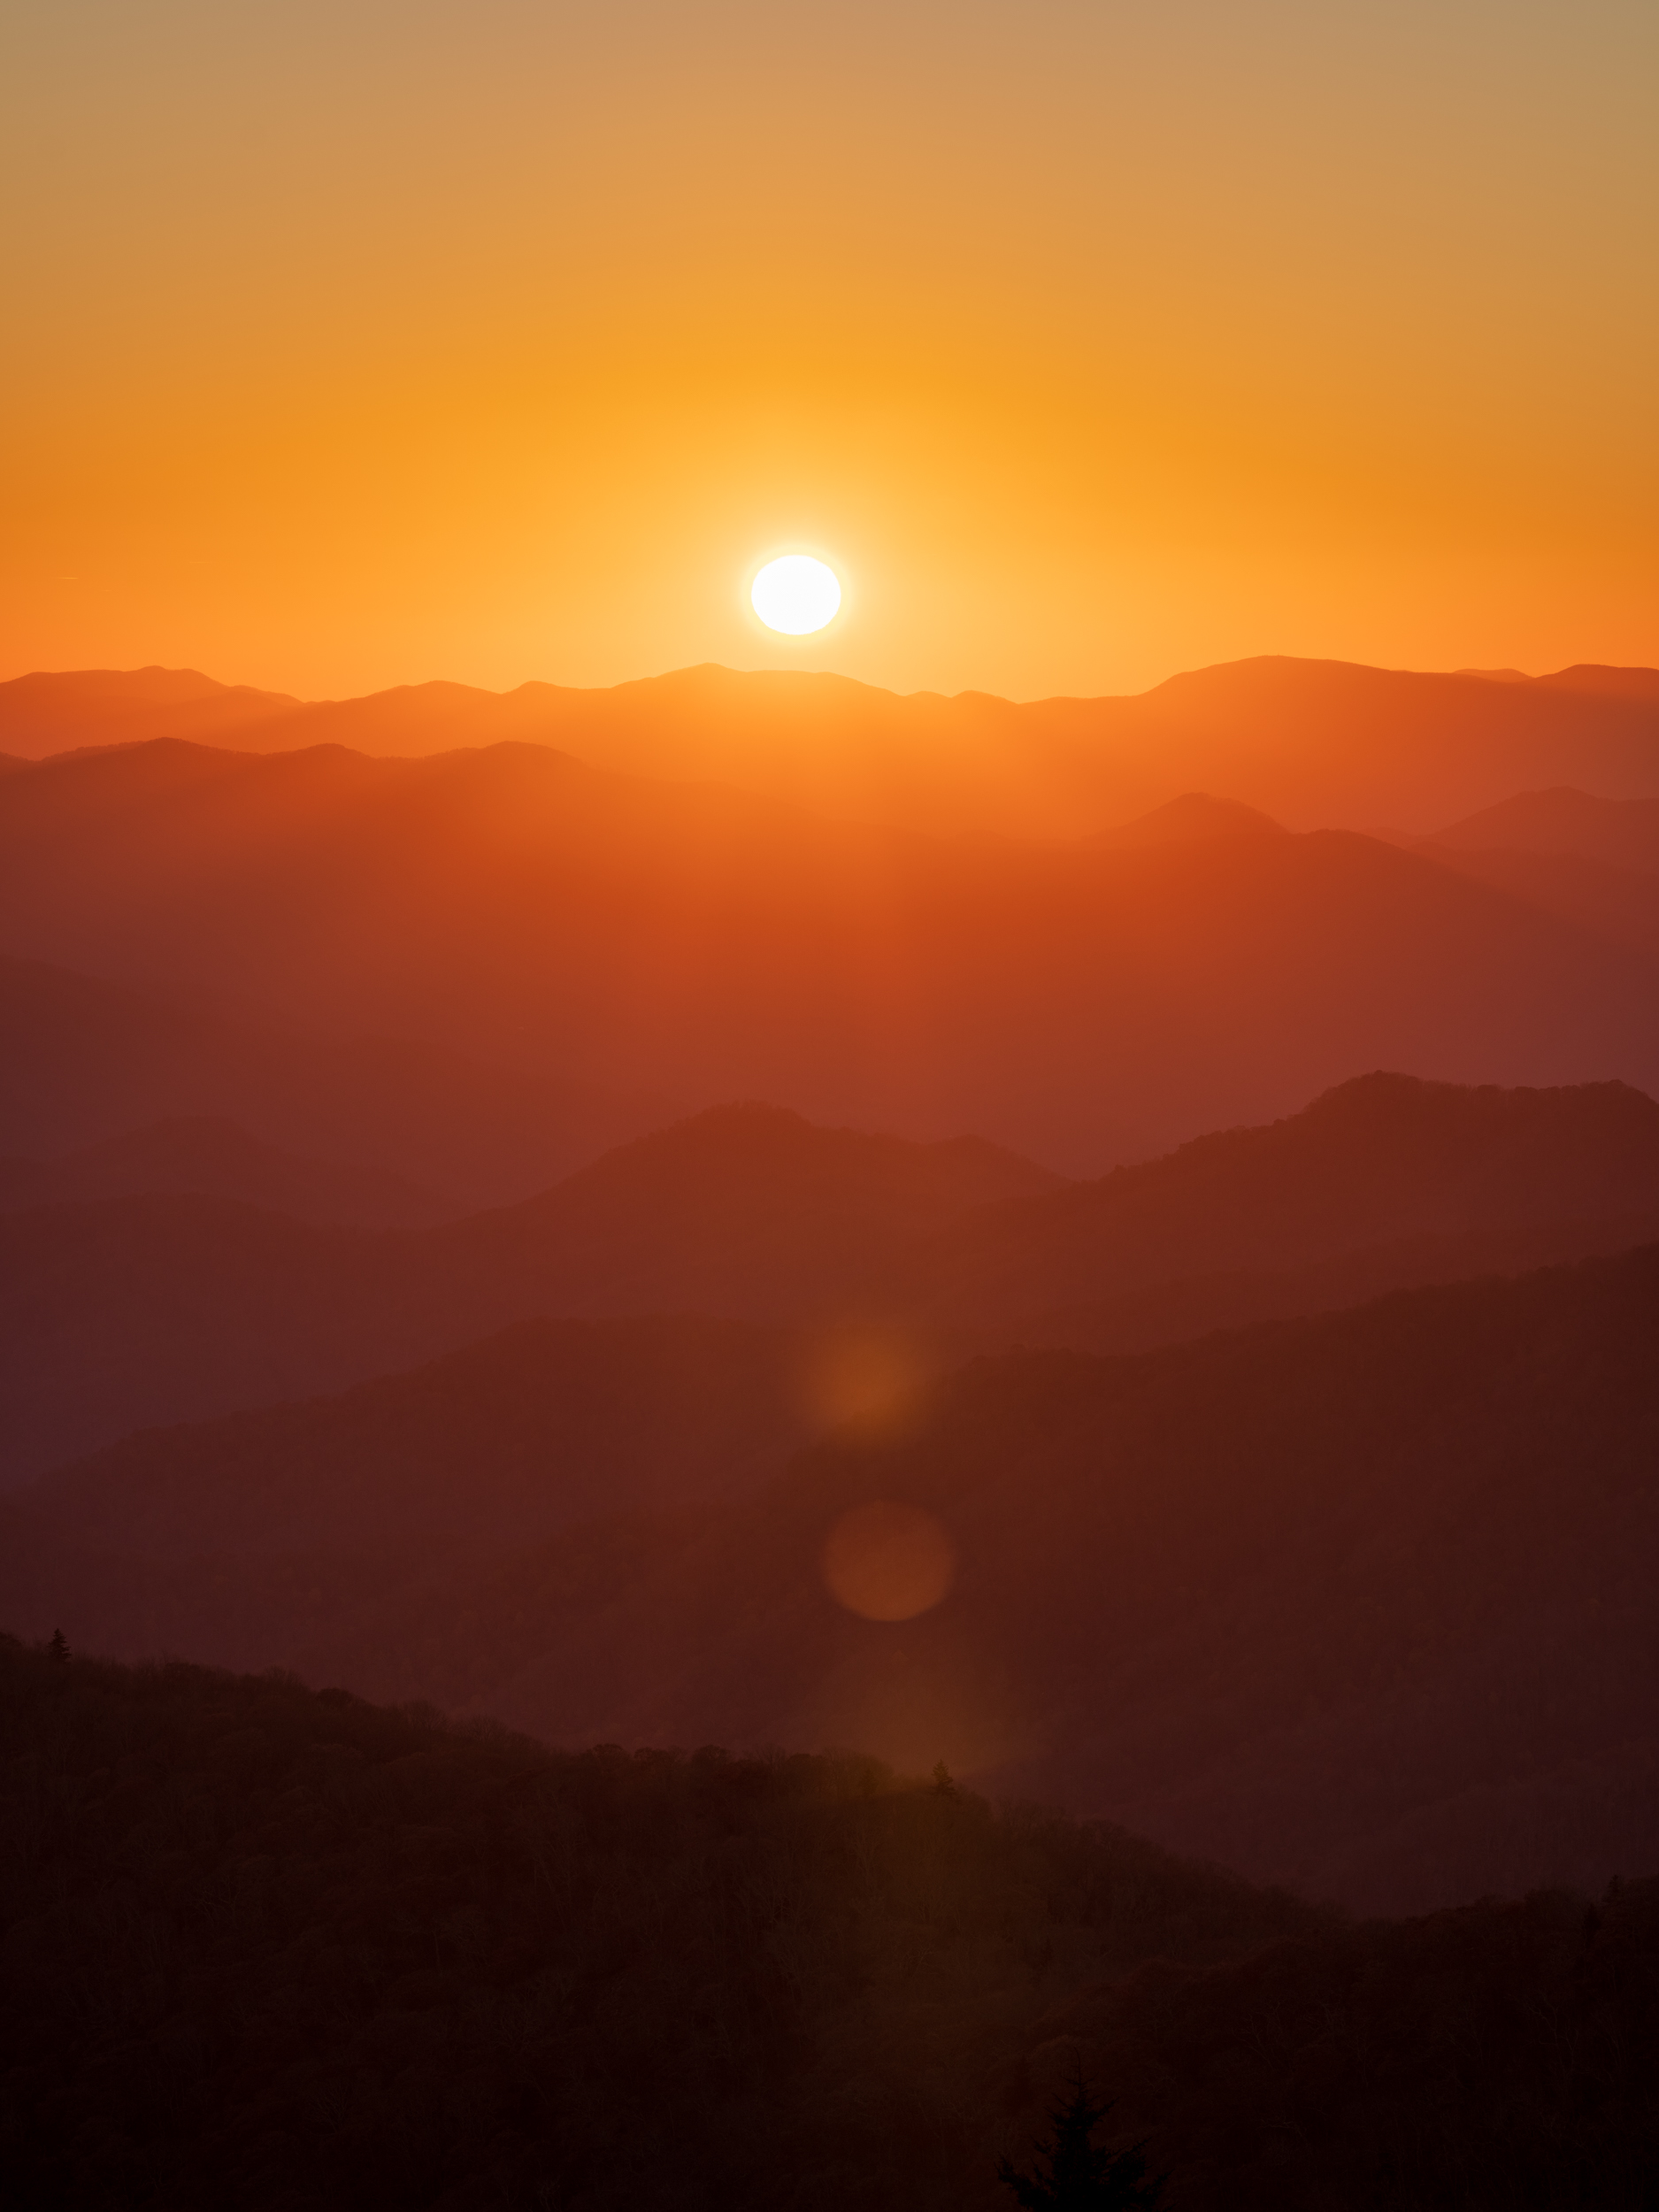 A symphony of light plays across the sky, announcing the morning over the Blue Ridge Mountains. The soft golden hues create a...